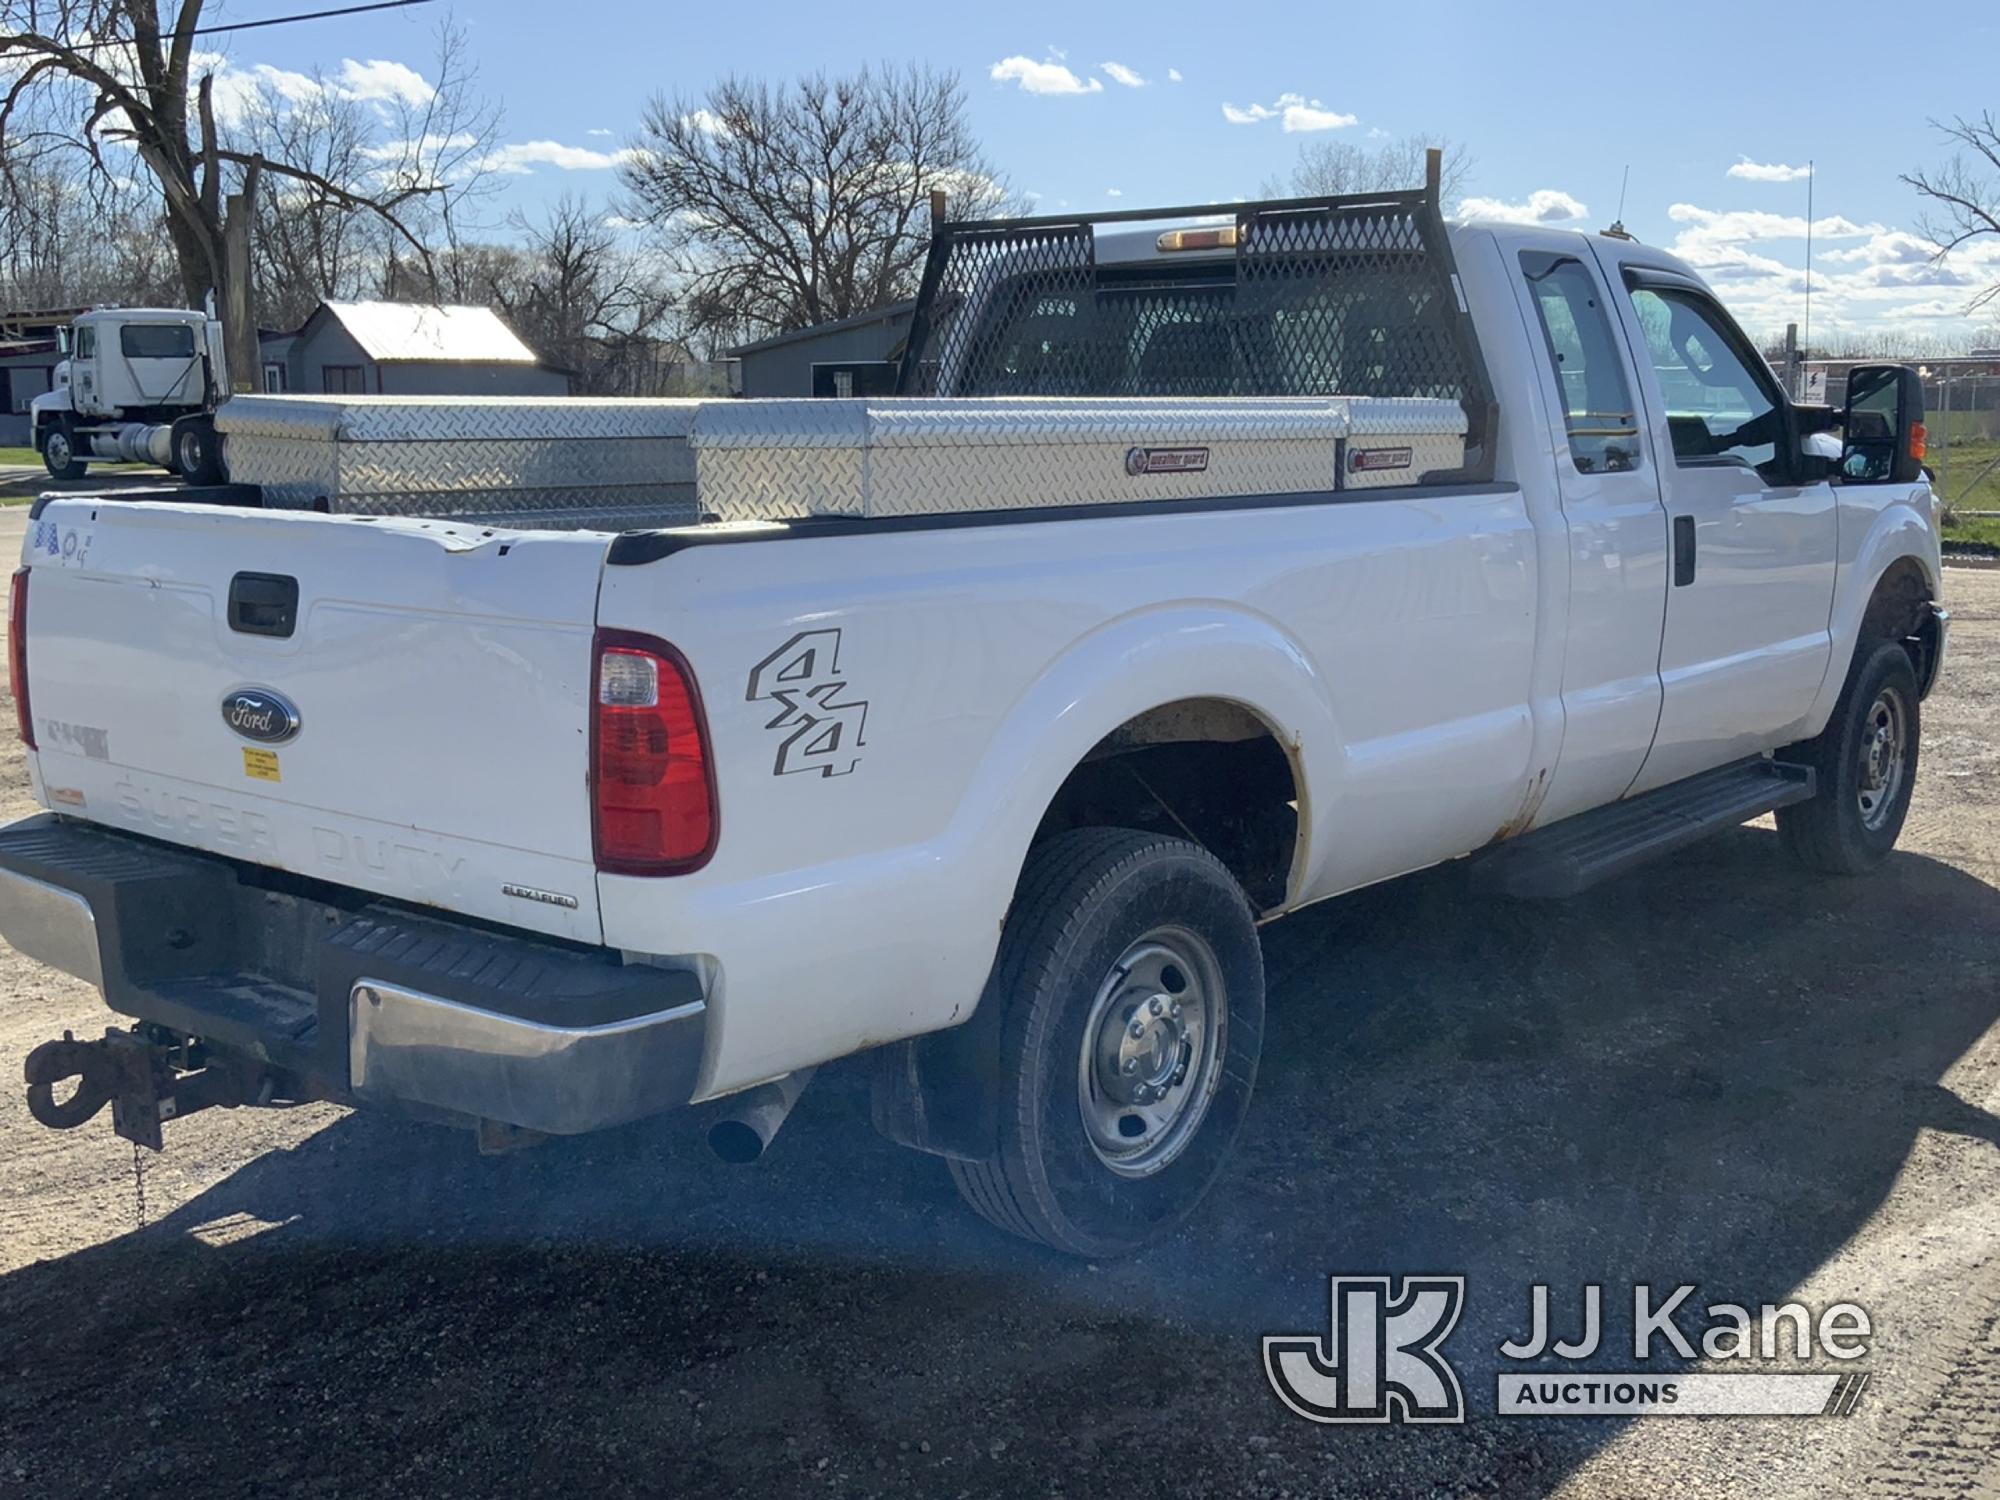 (South Beloit, IL) 2013 Ford F250 4x4 Extended-Cab Pickup Truck Runs & Moves) (Body Damage, Rust Dam